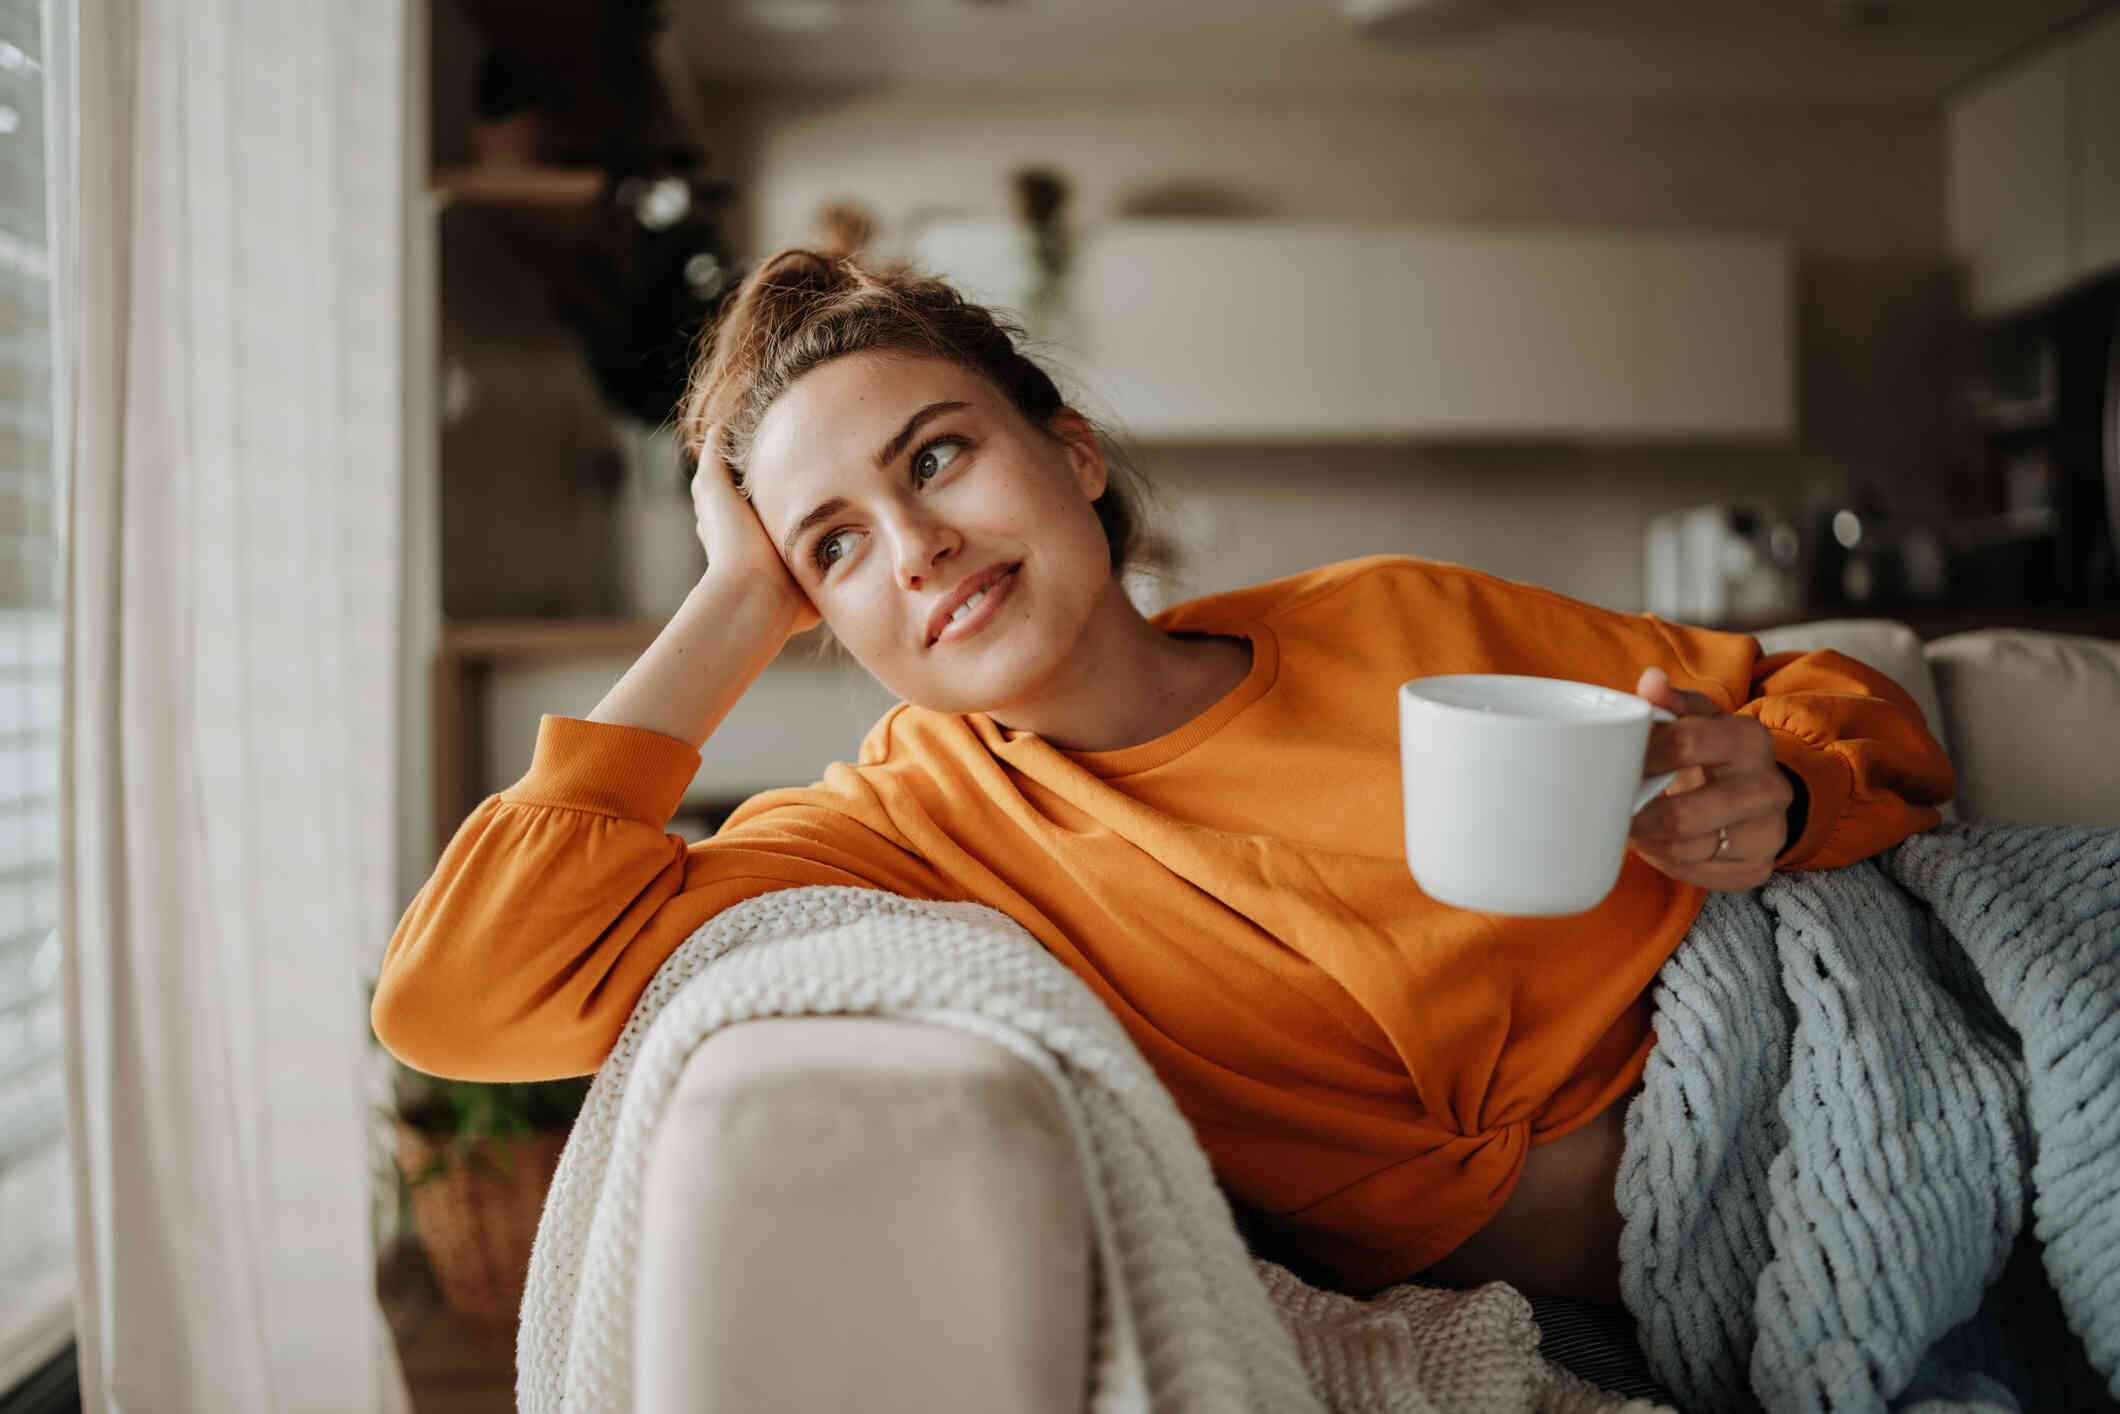 A woman in an orange shirt reclines on the couch while holding a cup of coffee and gazing off with a smile.